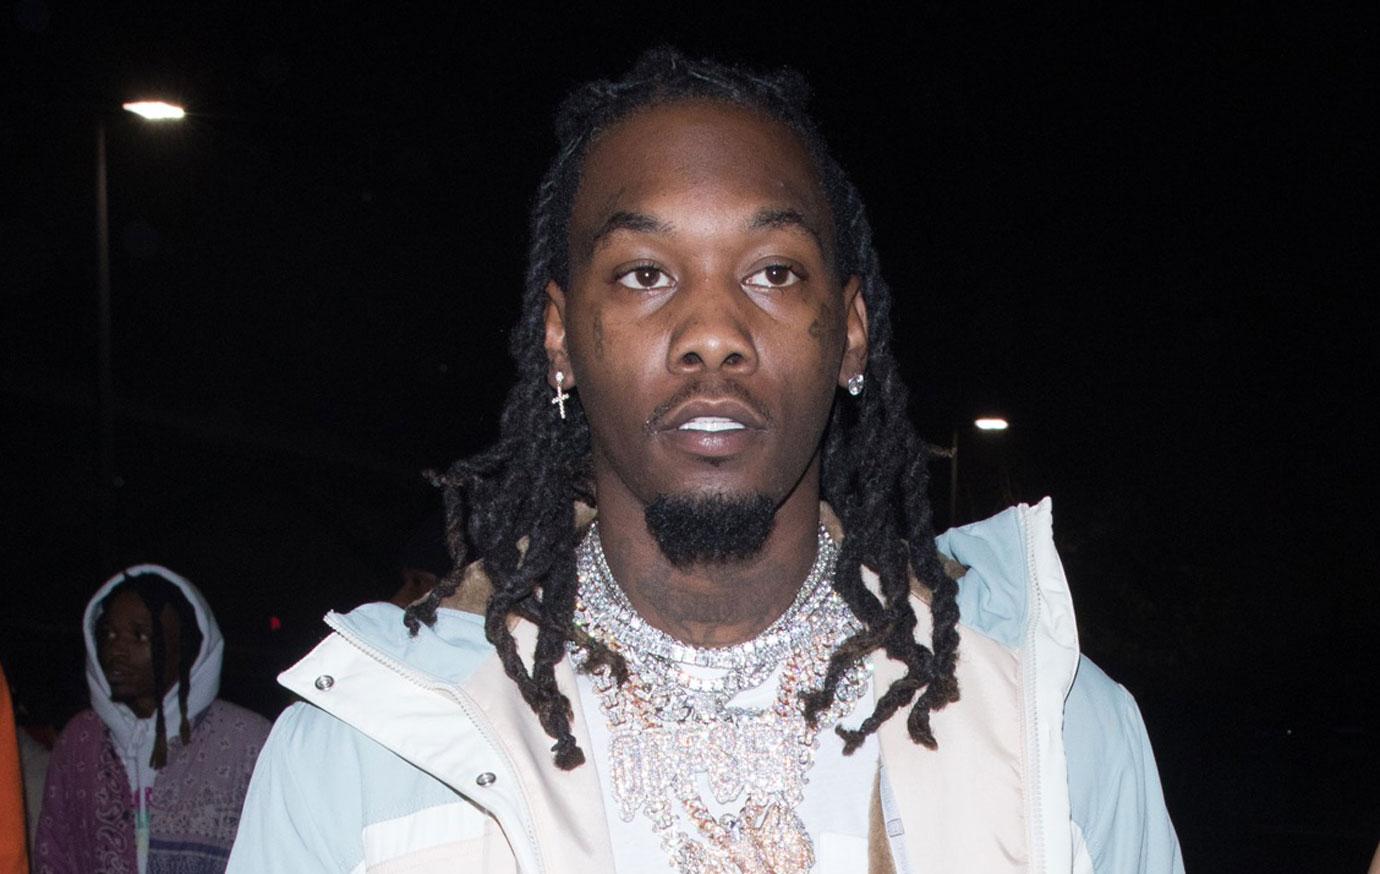 Offset Celebs With Multiple Baby Mamas: Offset, Mick Jagger And More